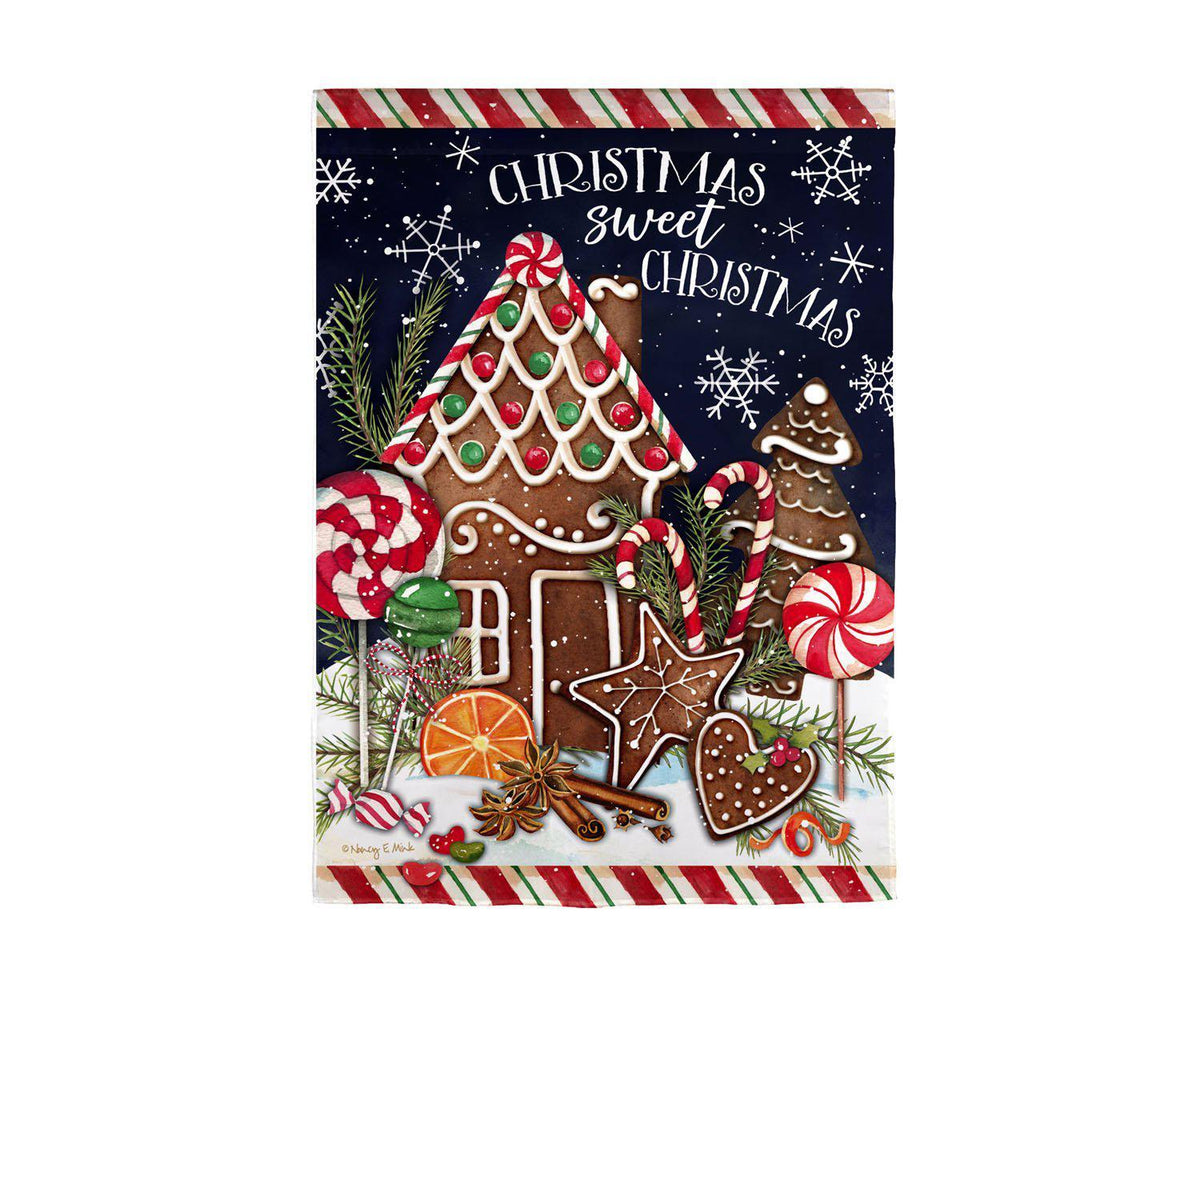 The Sweet Christmas garden flag features a gingerbread house surrounded by candy and gingerbread cookies along with the words "Christmas Sweet Christmas". 